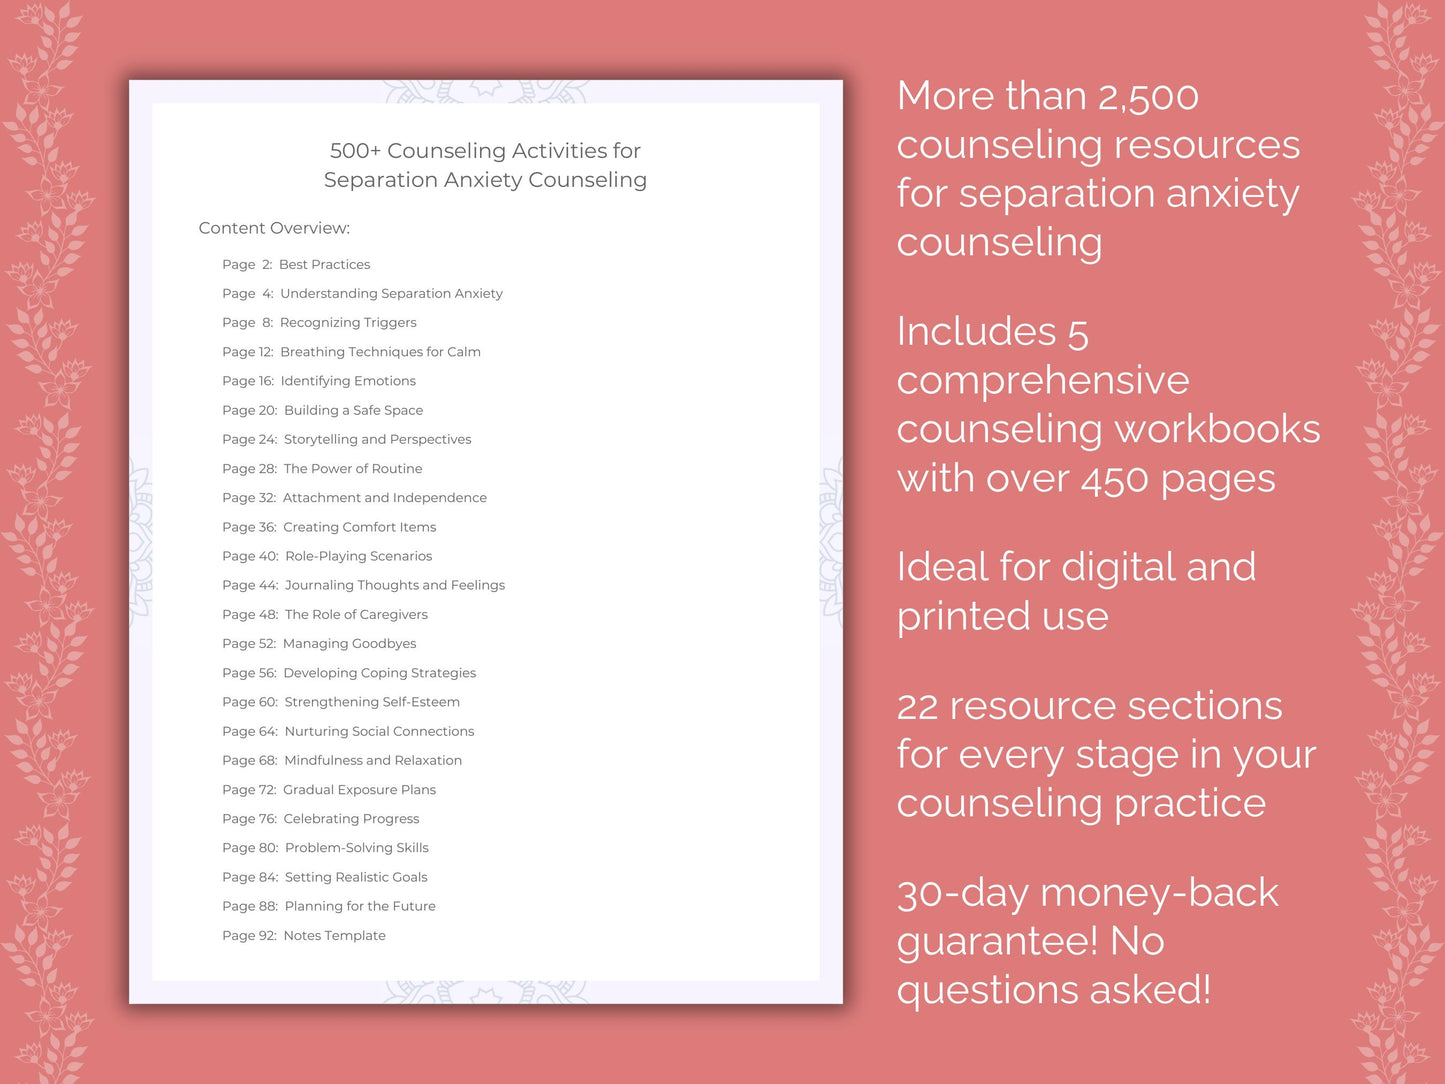 Separation Worksheet, Separation Resource, Separation Template, Separation Bundle, Counseling, Therapist, Anxiety, Separation Idea, Mental Health, Separation Workbook, Counselor, Separation, Separation Therapy